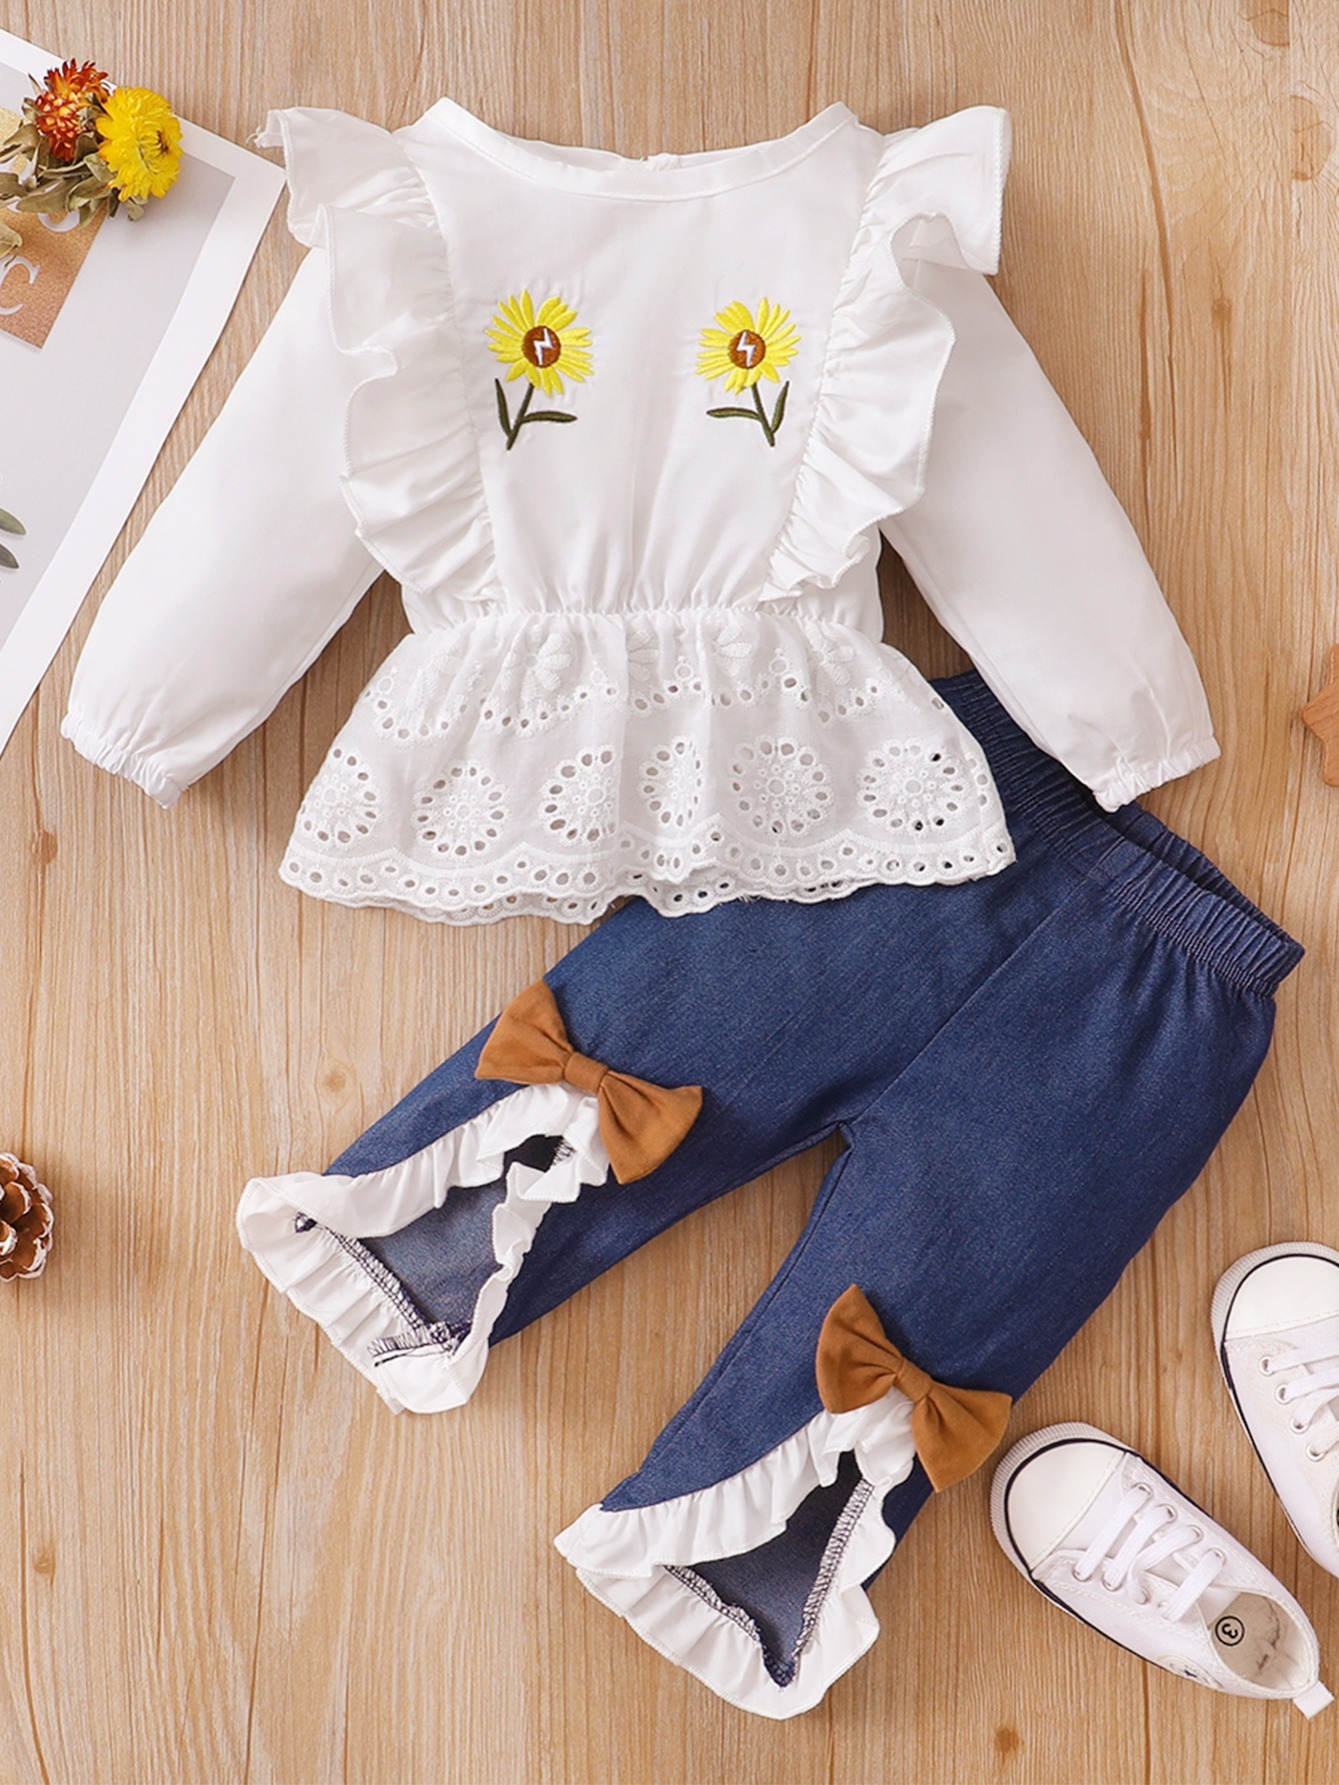 Save on 2pcs Set Baby Girls Top & Denim Pants - Shop Our Store Now!